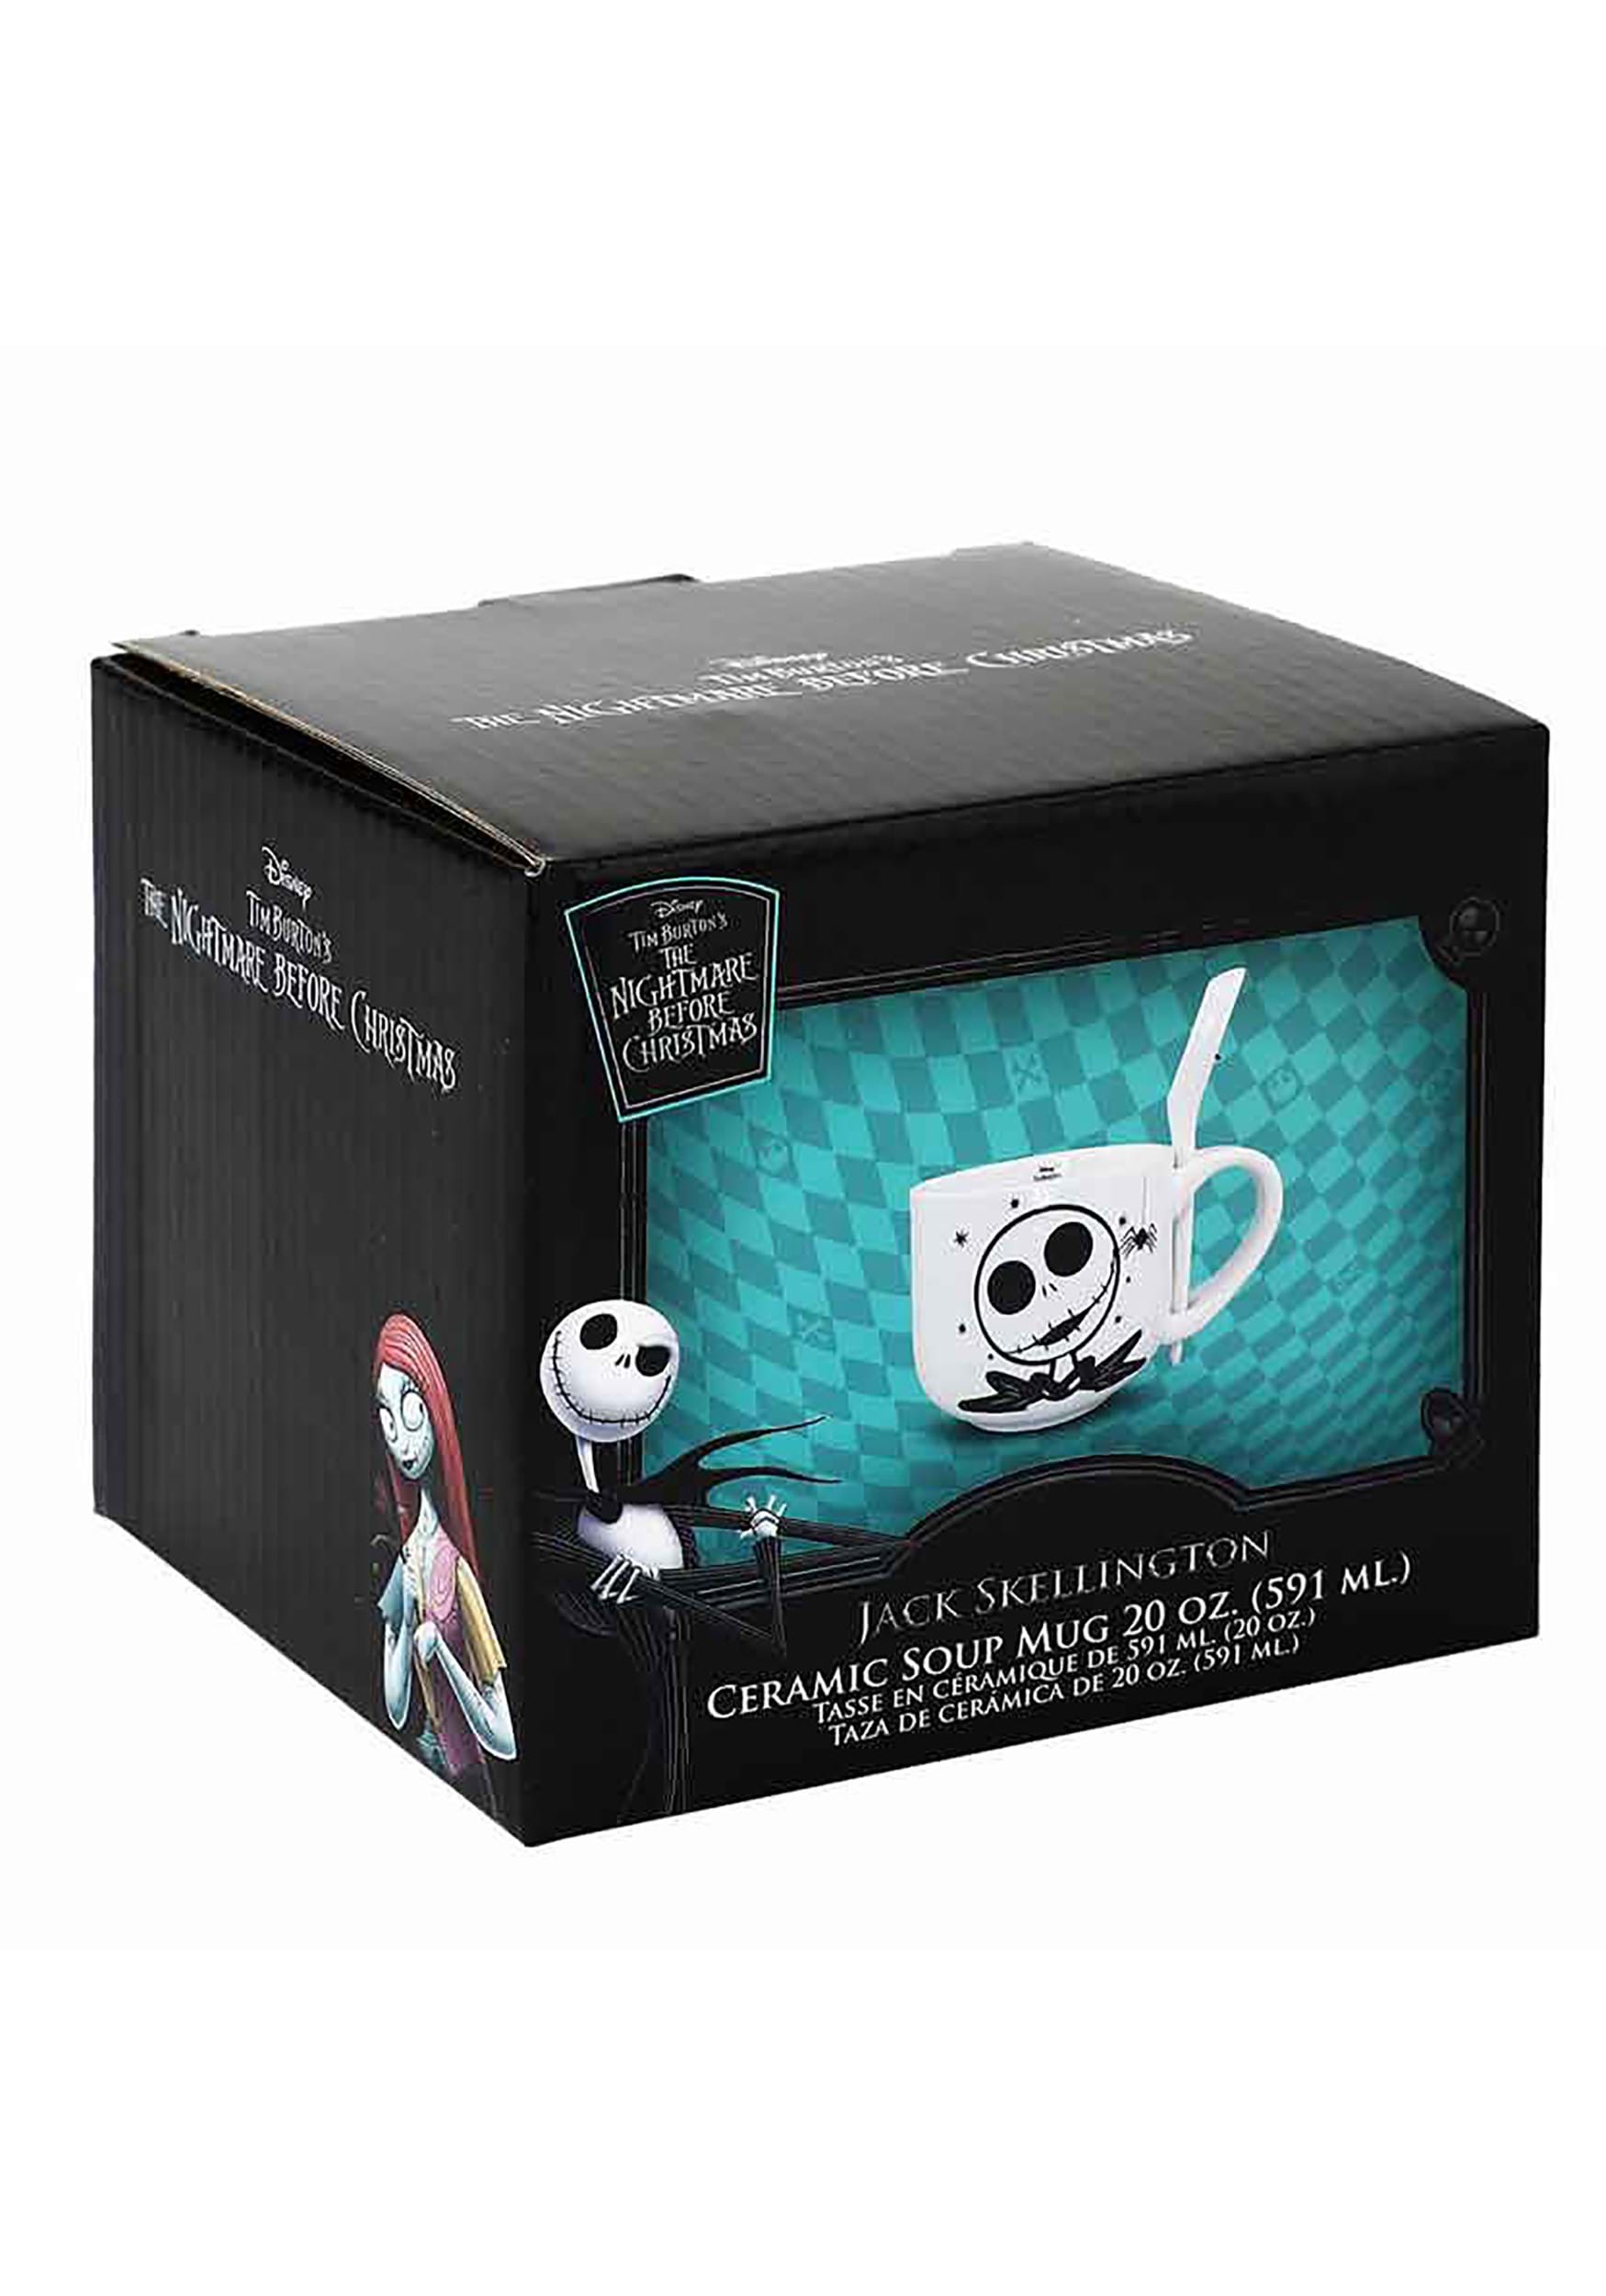 https://images.fun.com/products/79287/2-1-204330/the-nightmare-before-christmas-jack-ceramic-soup-m-alt-4.jpg